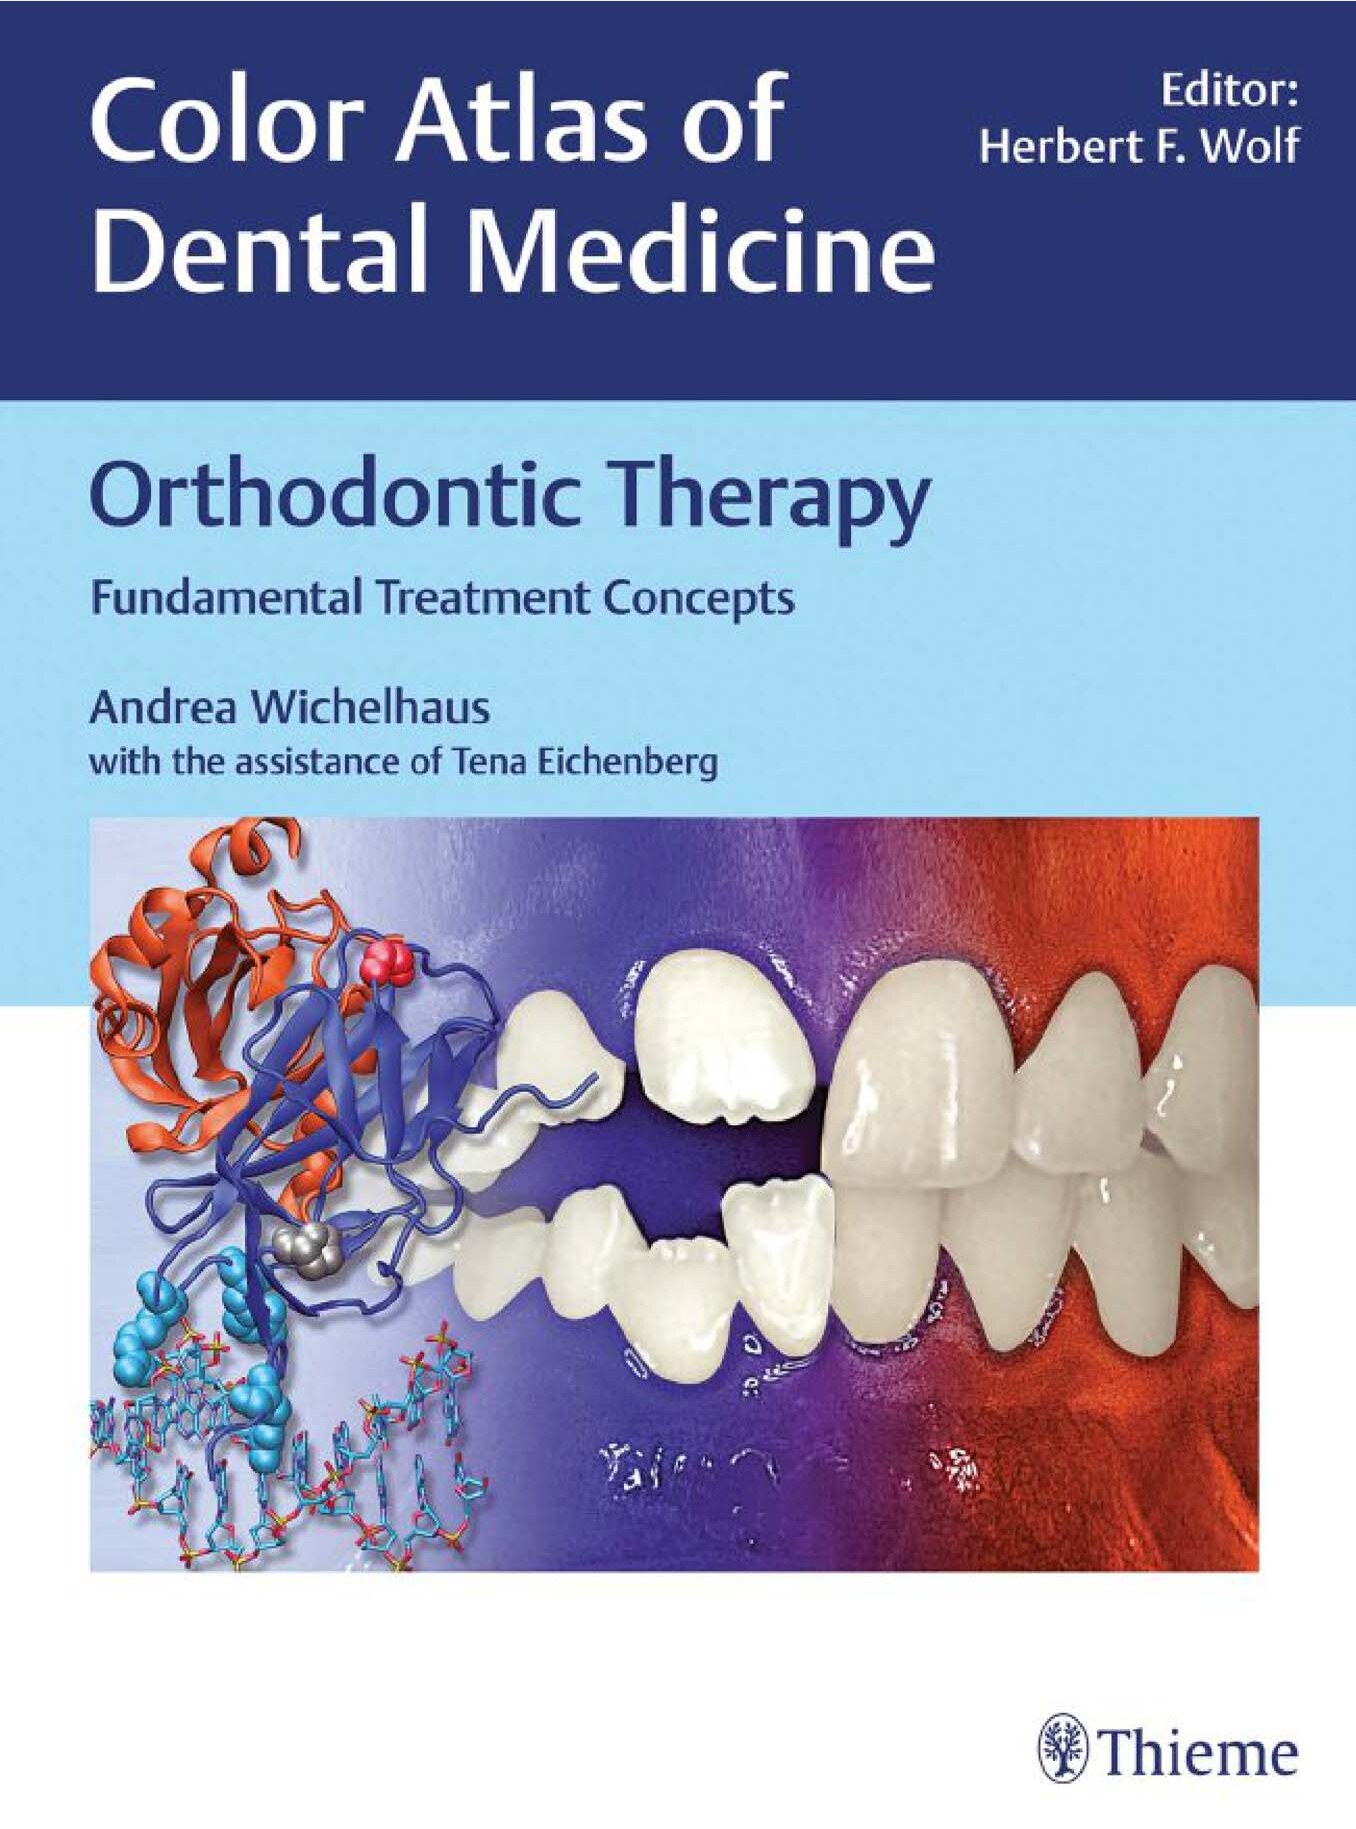 Color Atlas of Dental Medicine: Orthodontic-Therapy Fundamental Treatment Concepts - (2017)